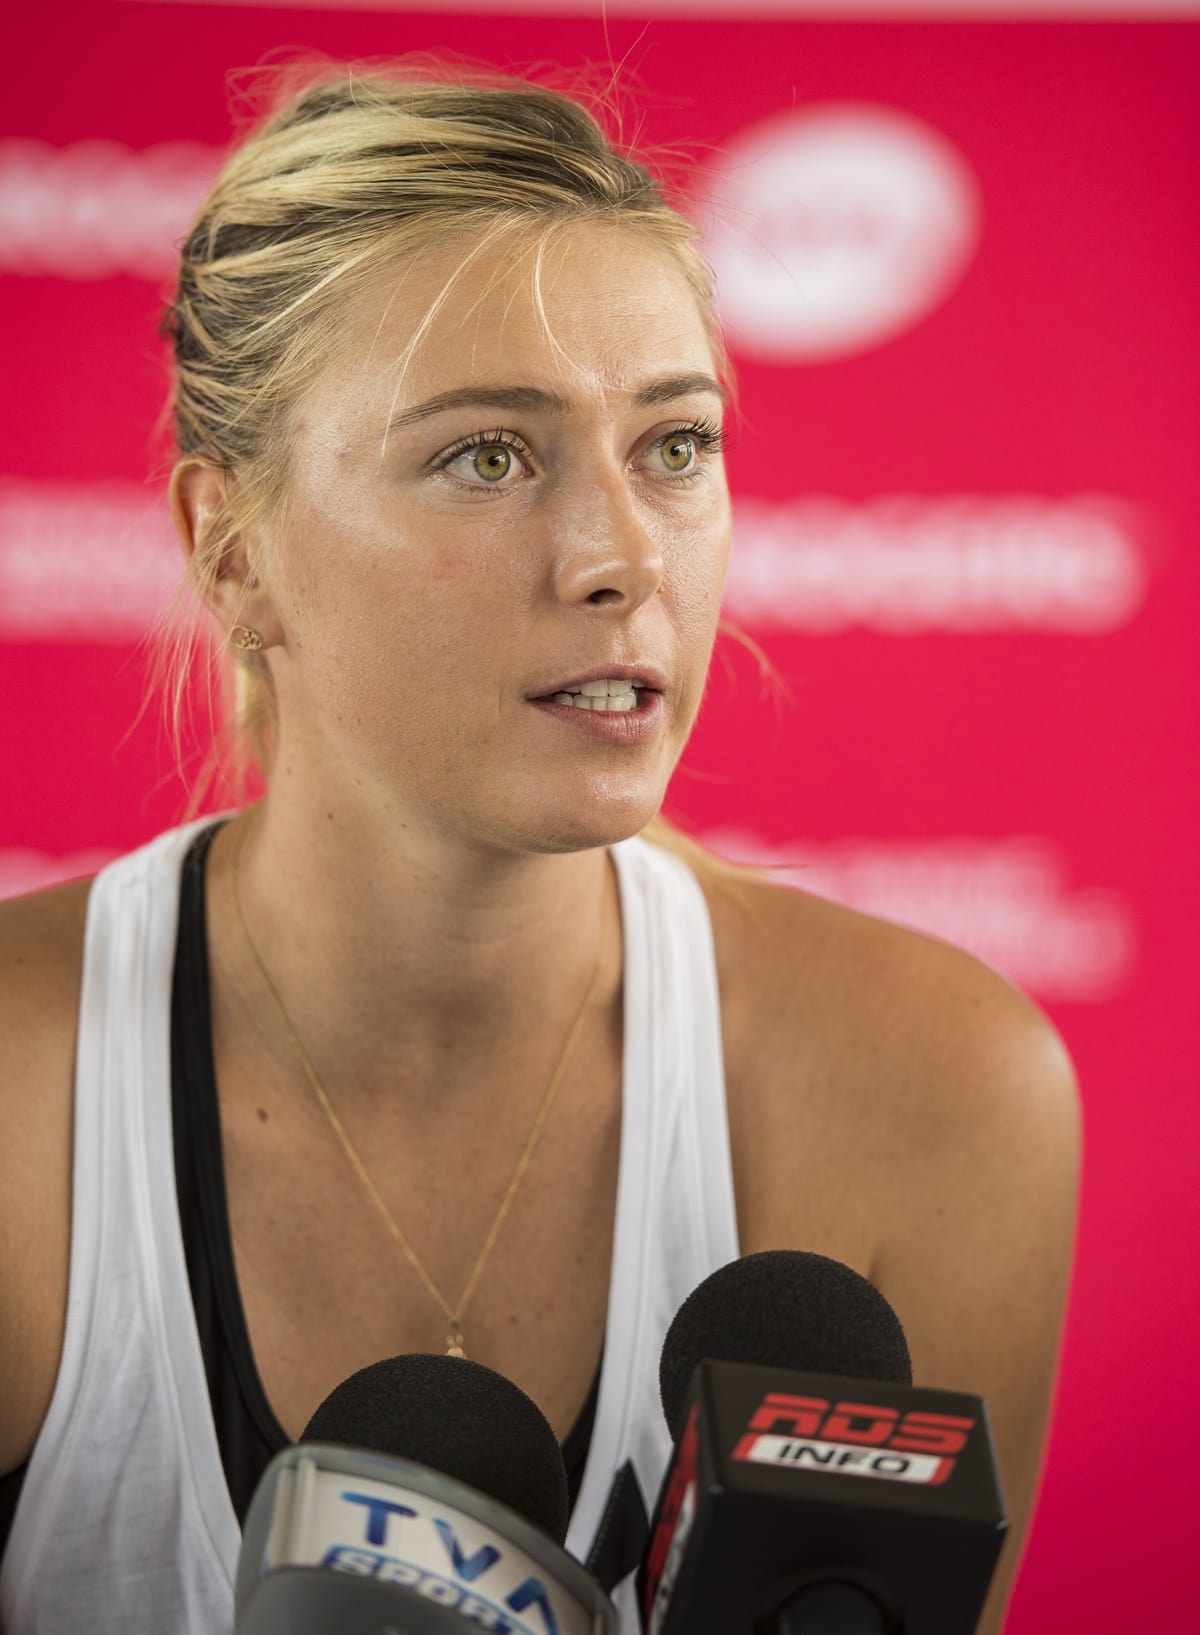 Maria Sharapova's exceptional talent, marketability, and endorsement deals with top brands propelled her beyond the realm of sports, elevating her to the status of one of the highest-paid female athletes worldwide, a remarkable achievement resulting from both her on-court success and lucrative partnerships